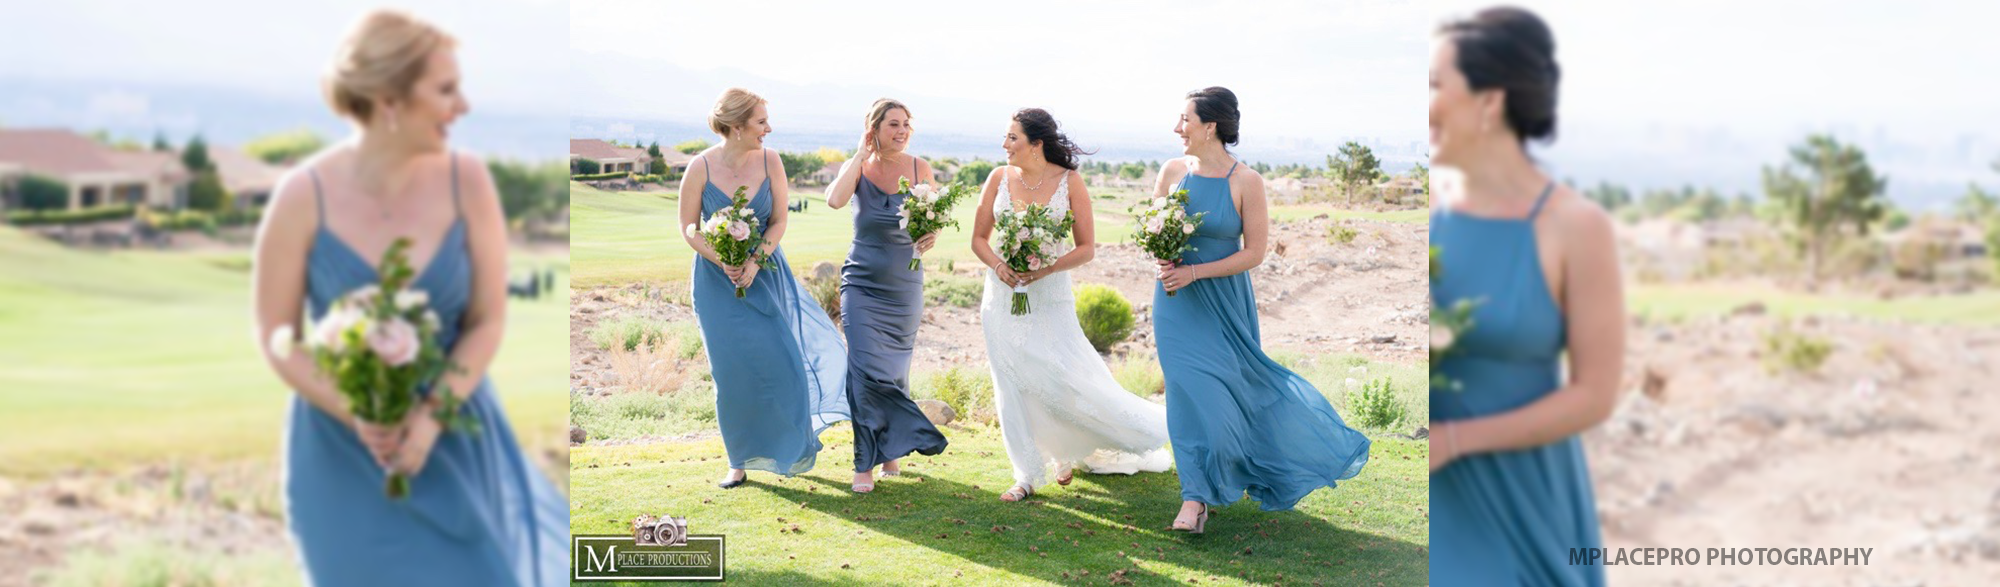 Bride with her Bridesmaids in blue